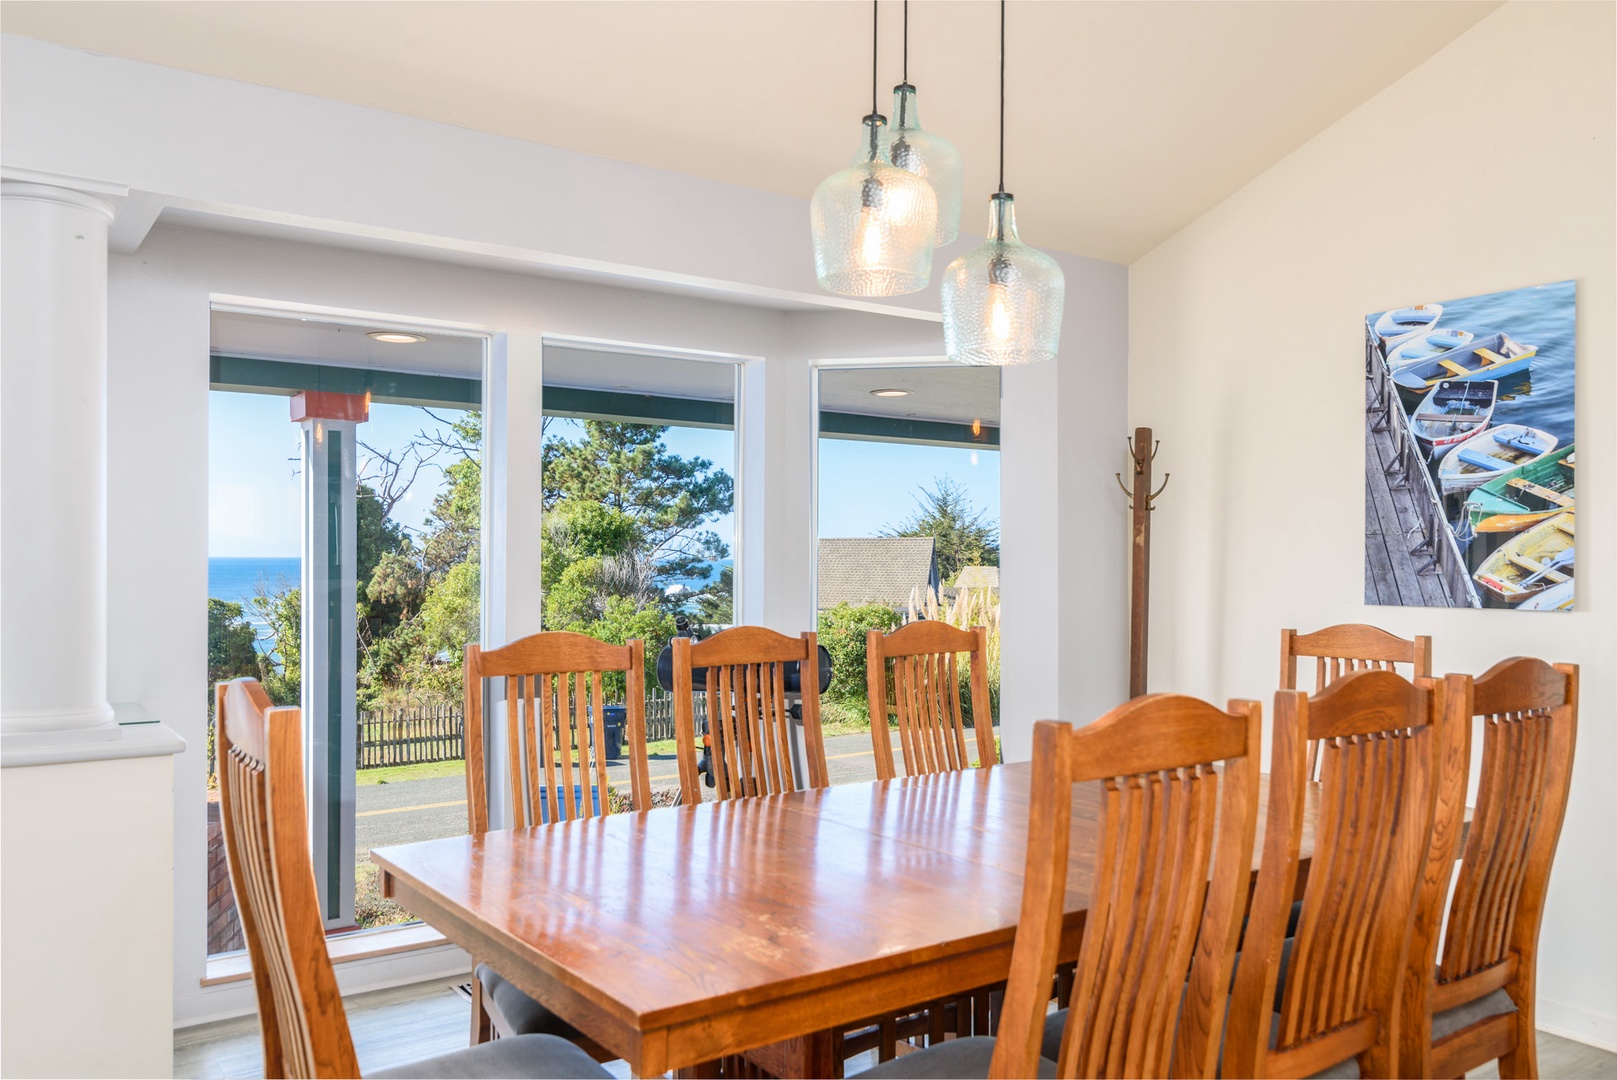 Dining room with table seating for 8 and ocean views